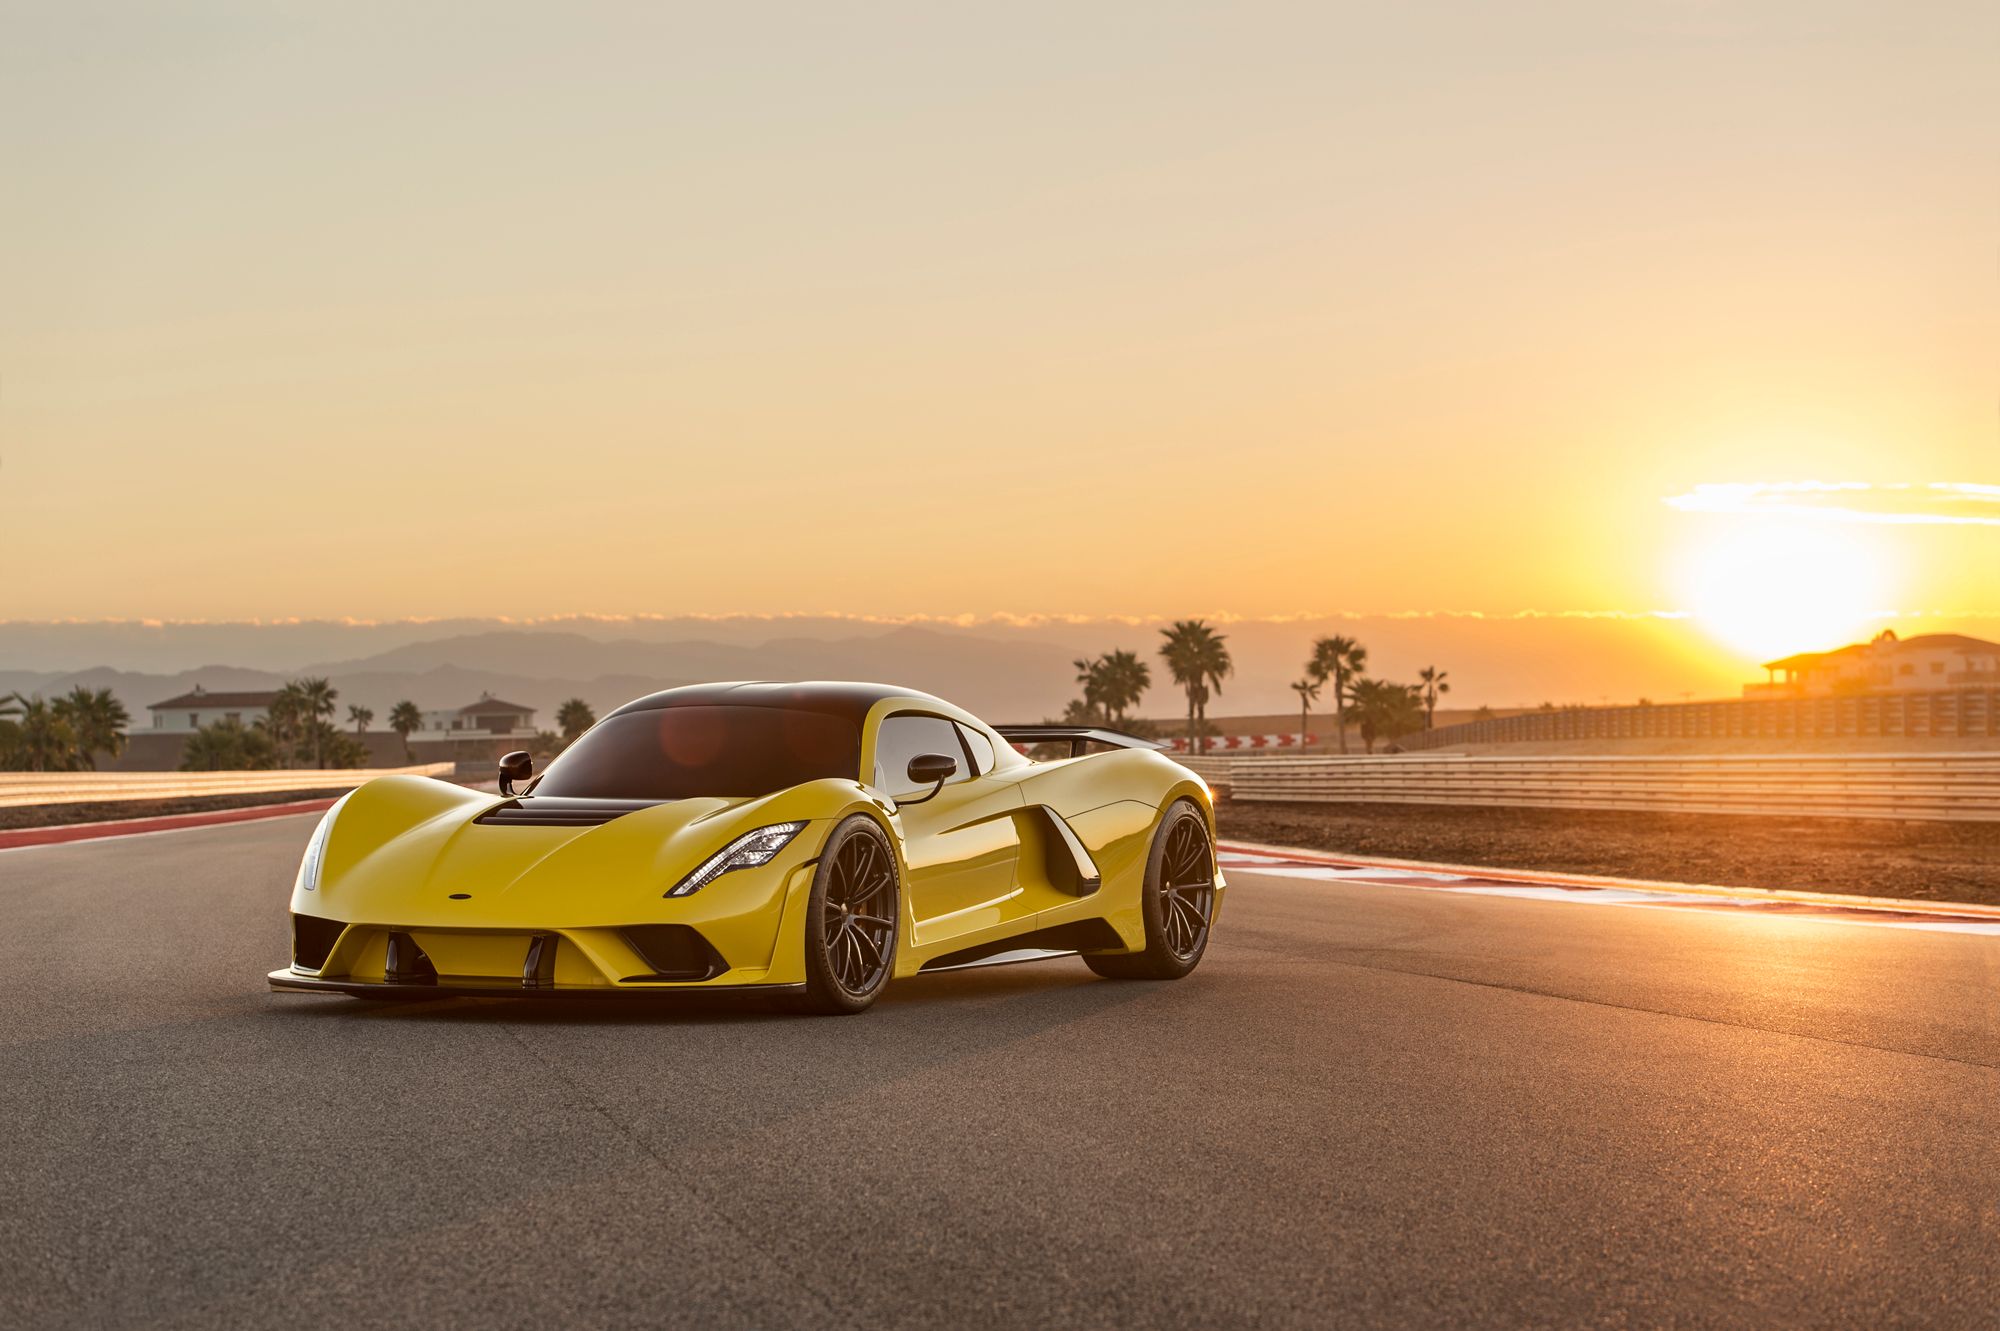 2019 Hennessey Claims to Have Pushed the Venom F5 Engine to Over 2,000 Horsepower